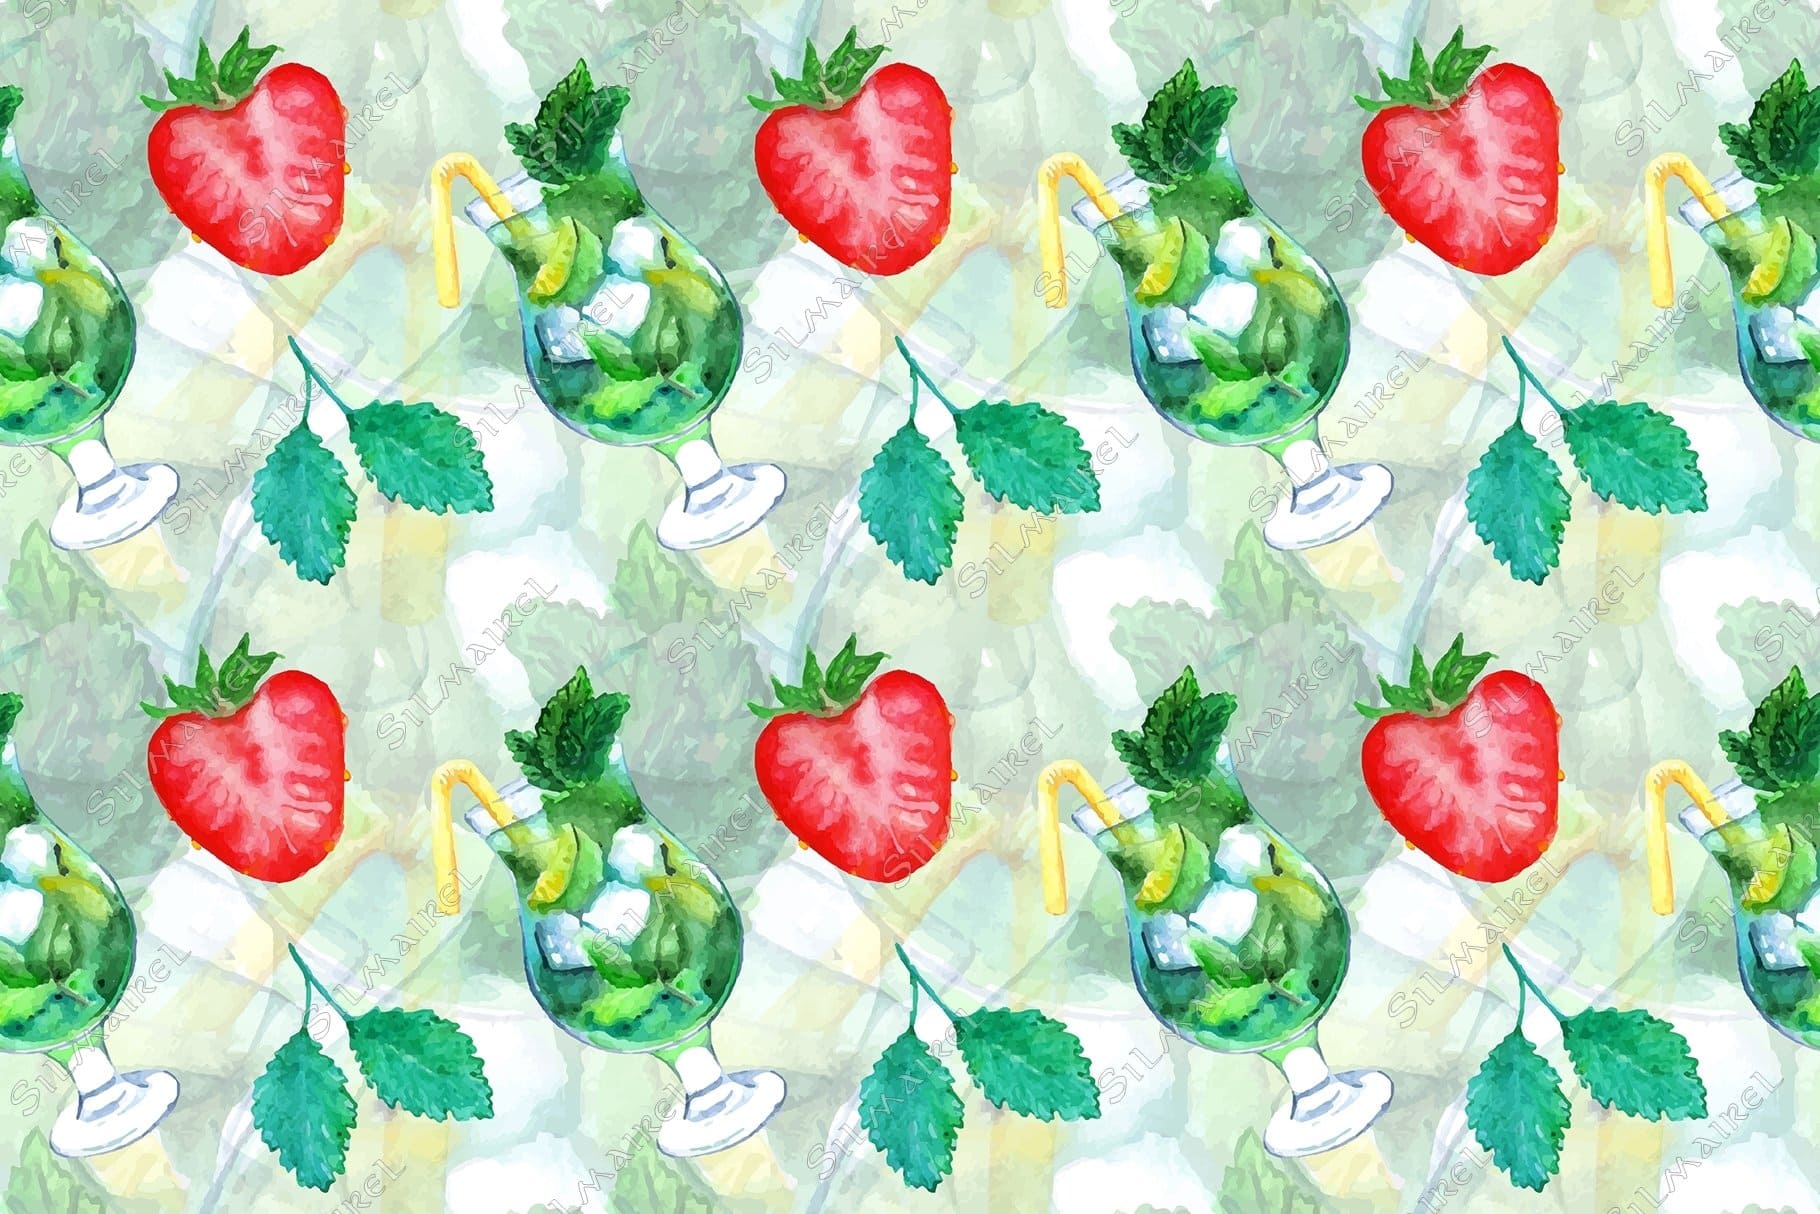 Background of mojito color with the image of strawberries and mint leaves.